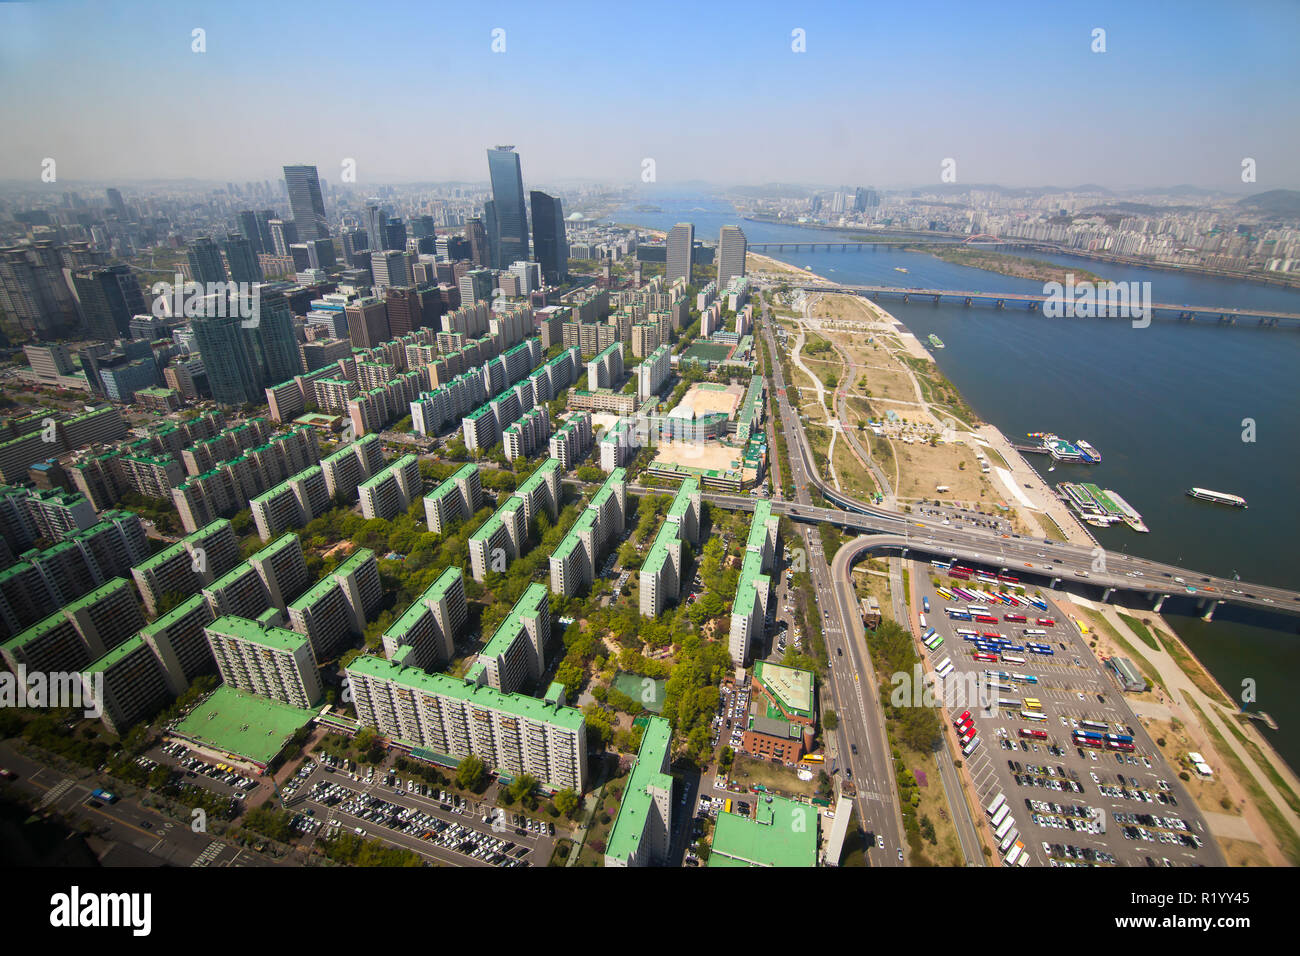 View of Seoul from 63 Building, Korea Stock Photo